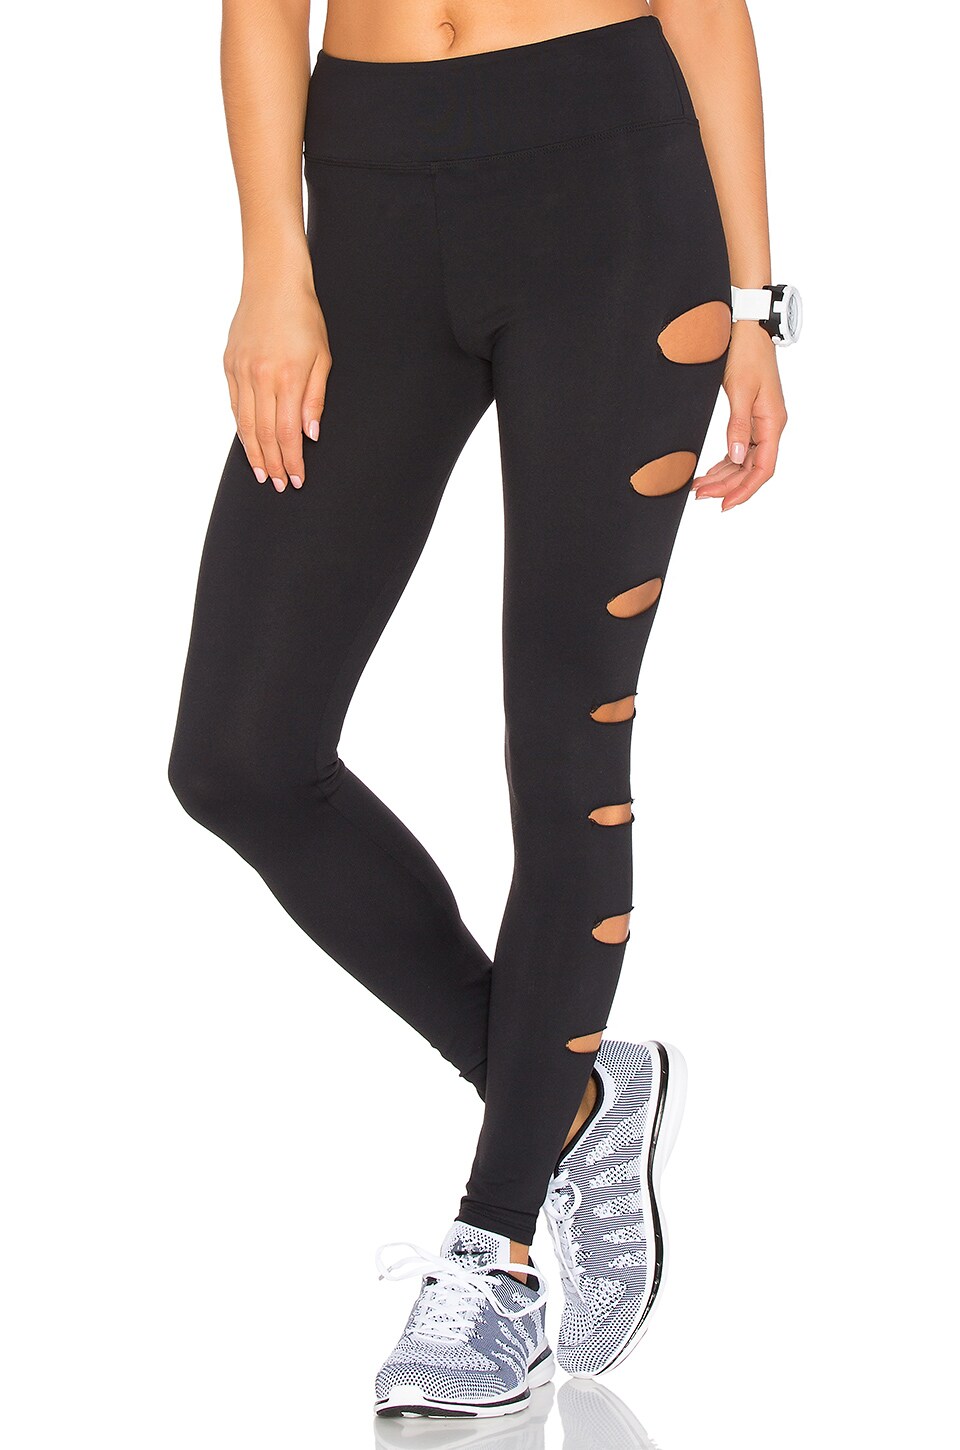 WORK by Lovers + Friends In A Flash Legging